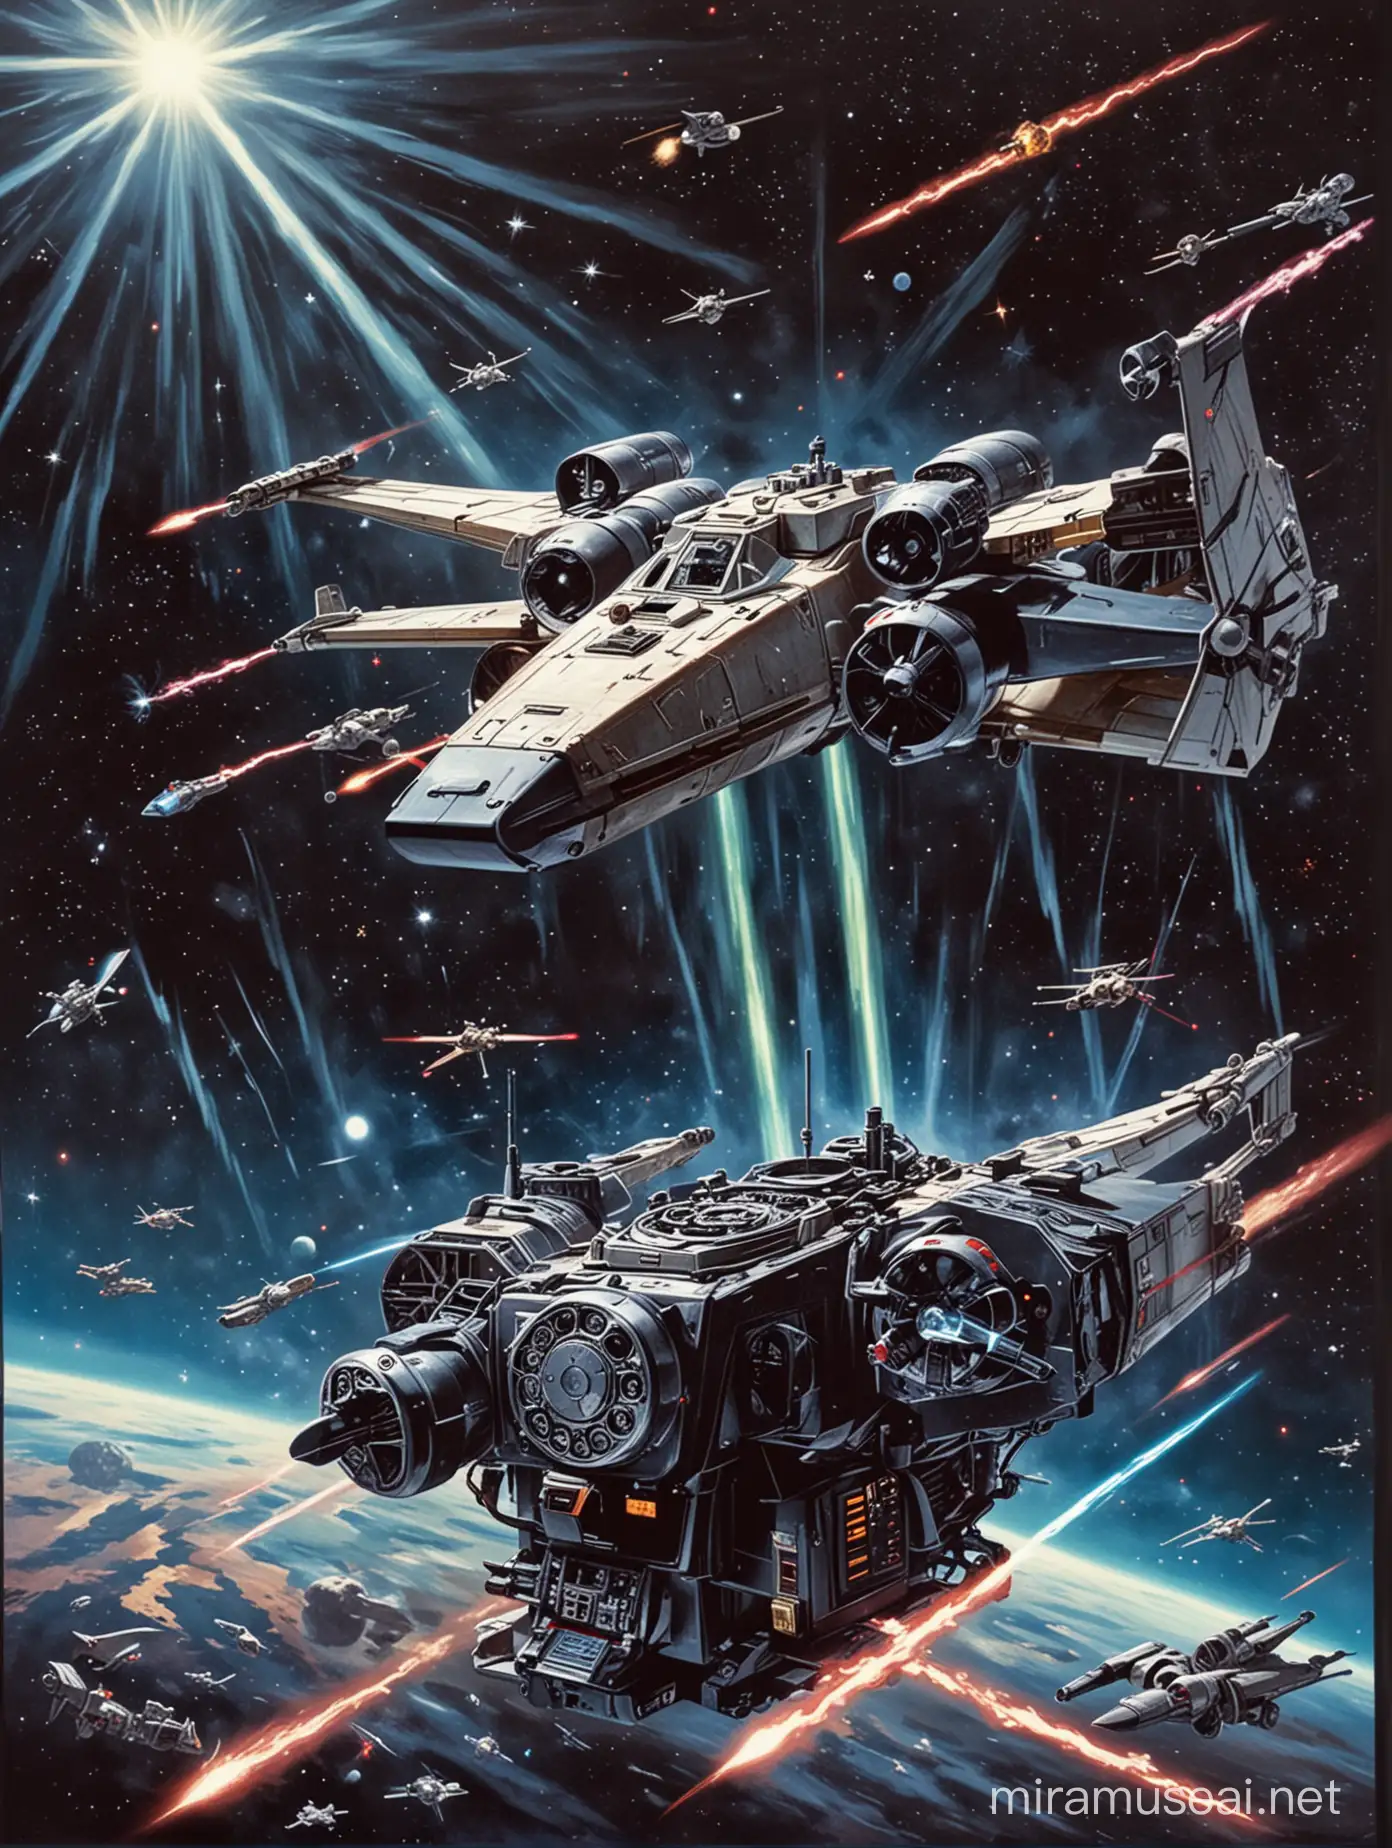 X-wings fighiting in space with big old black telephone that shoots lasers, 1970s Star Wars style, Star Wars movie poster